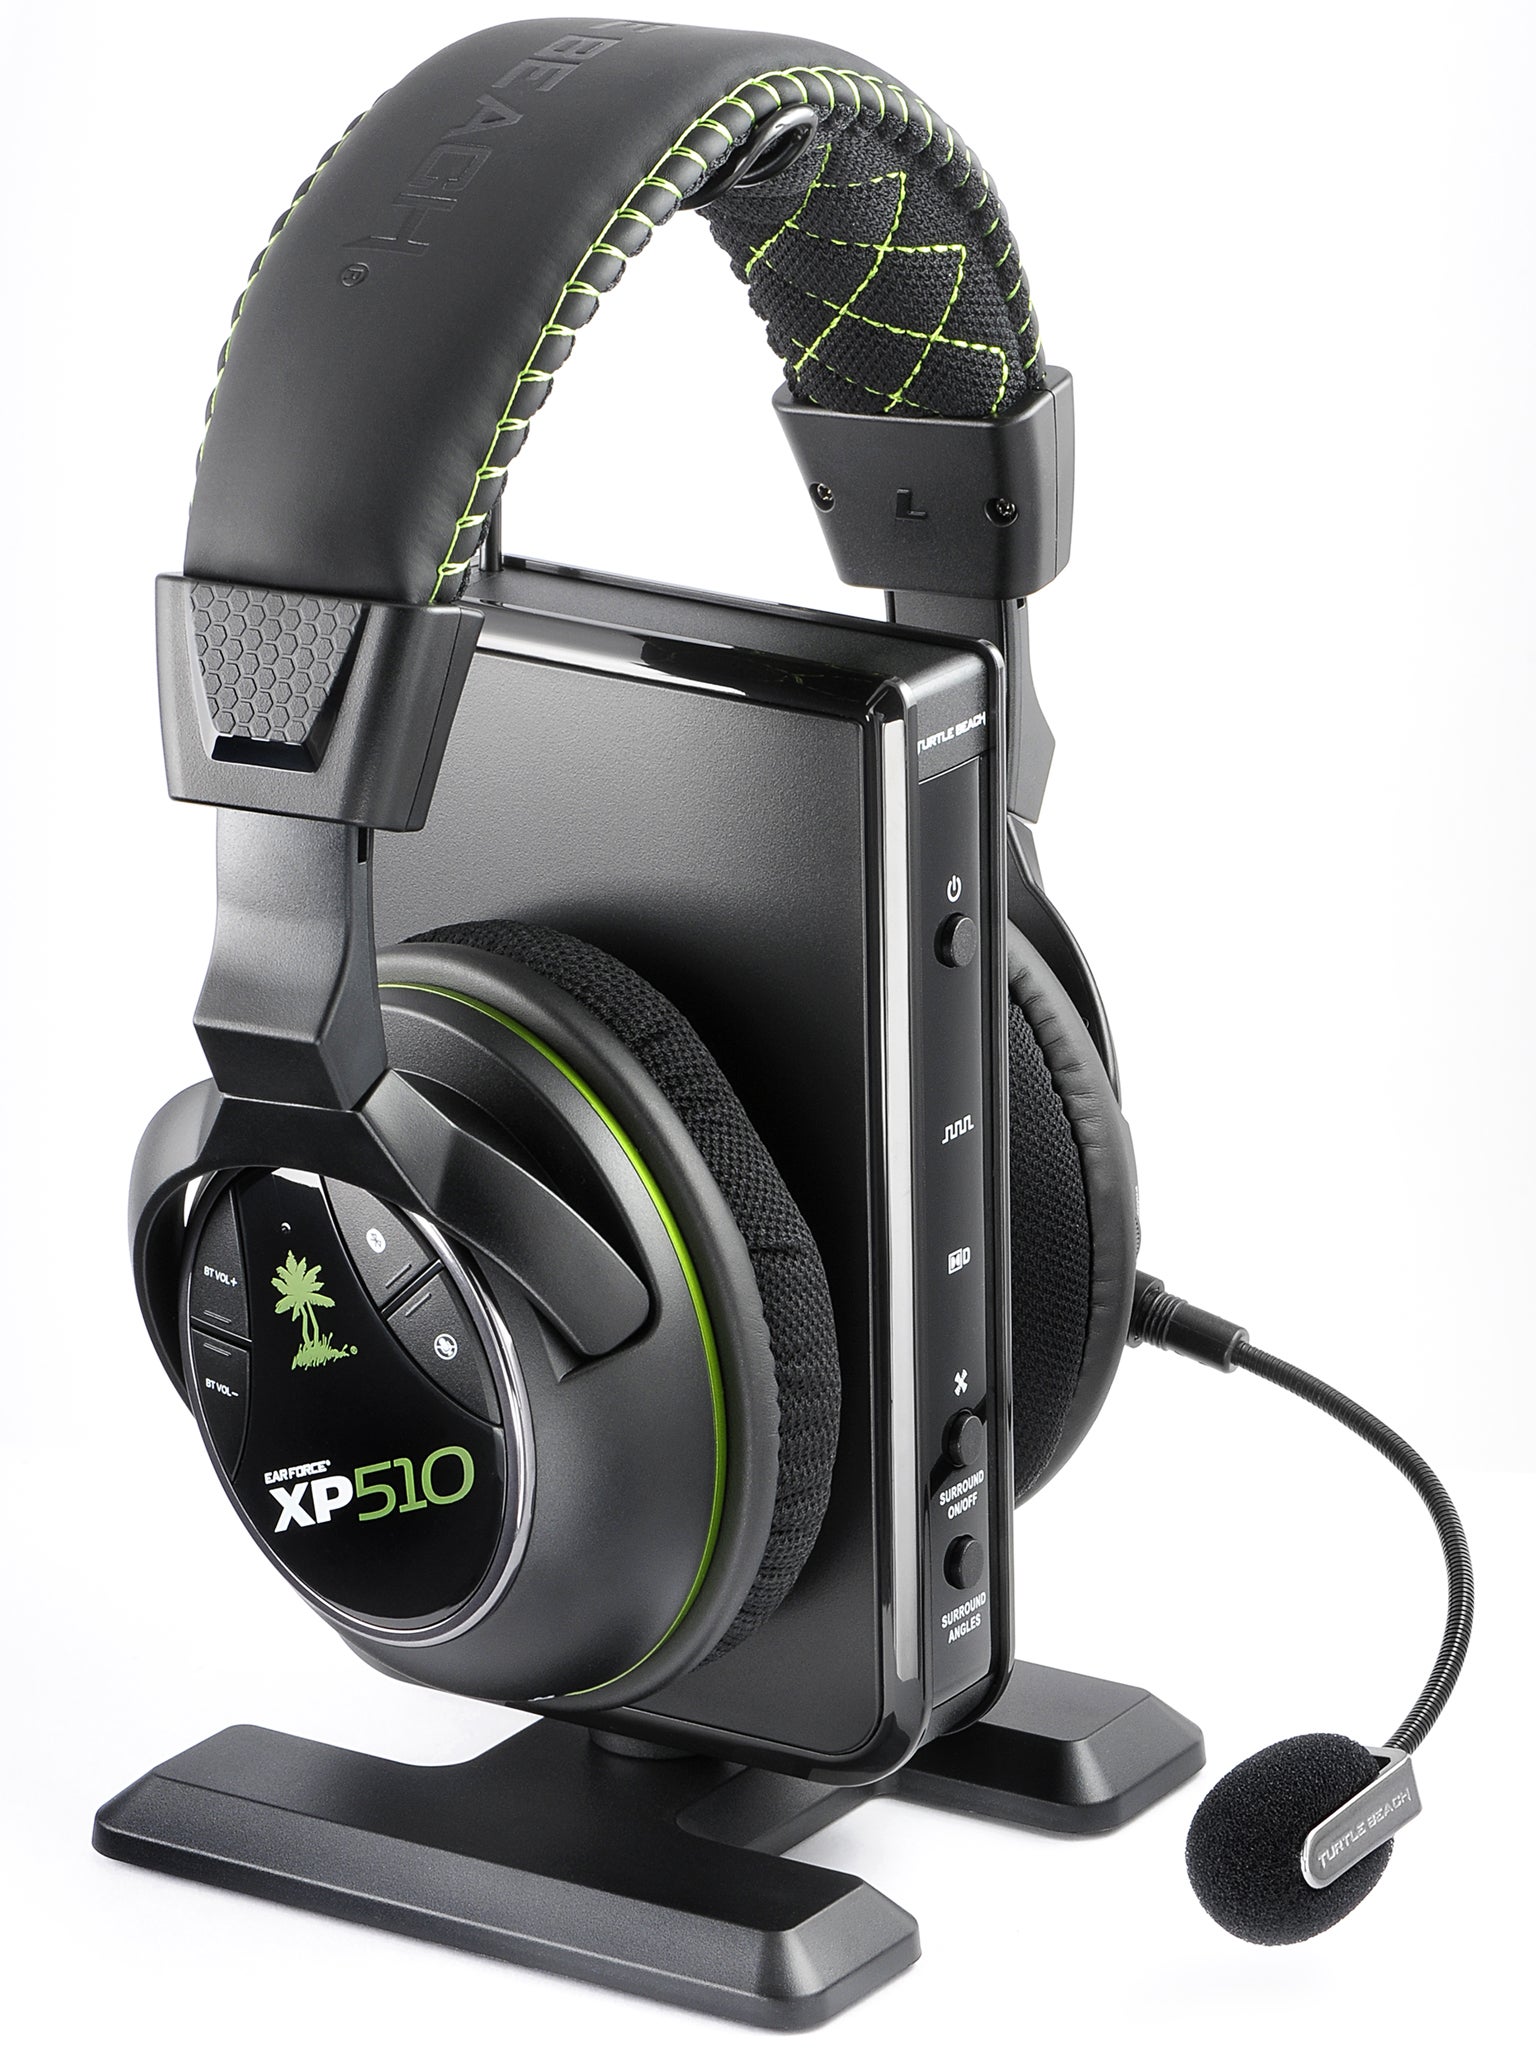 The PX51 Turtle Beach Earforce gaming headset